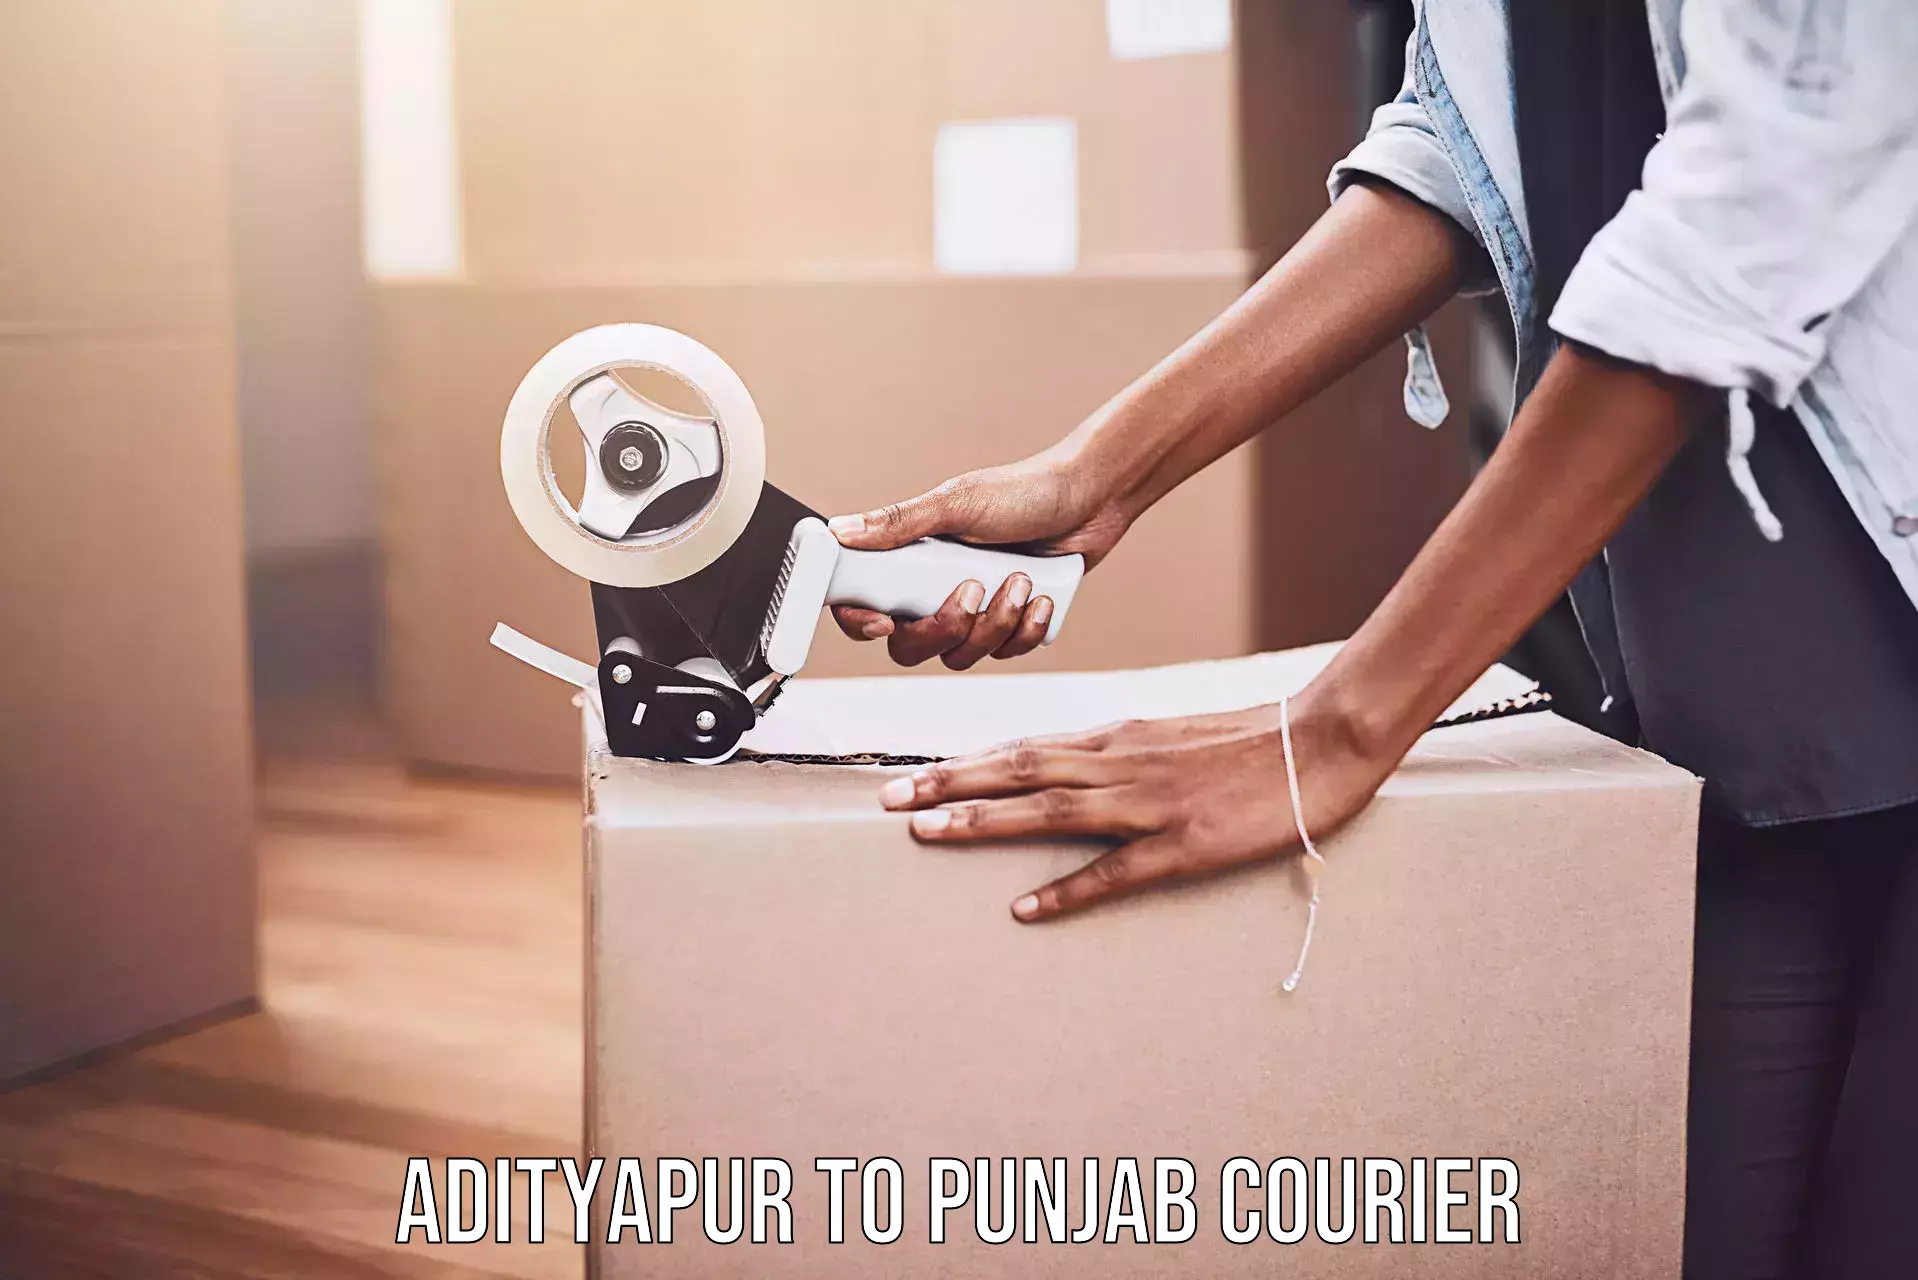 Courier service booking Adityapur to Malout